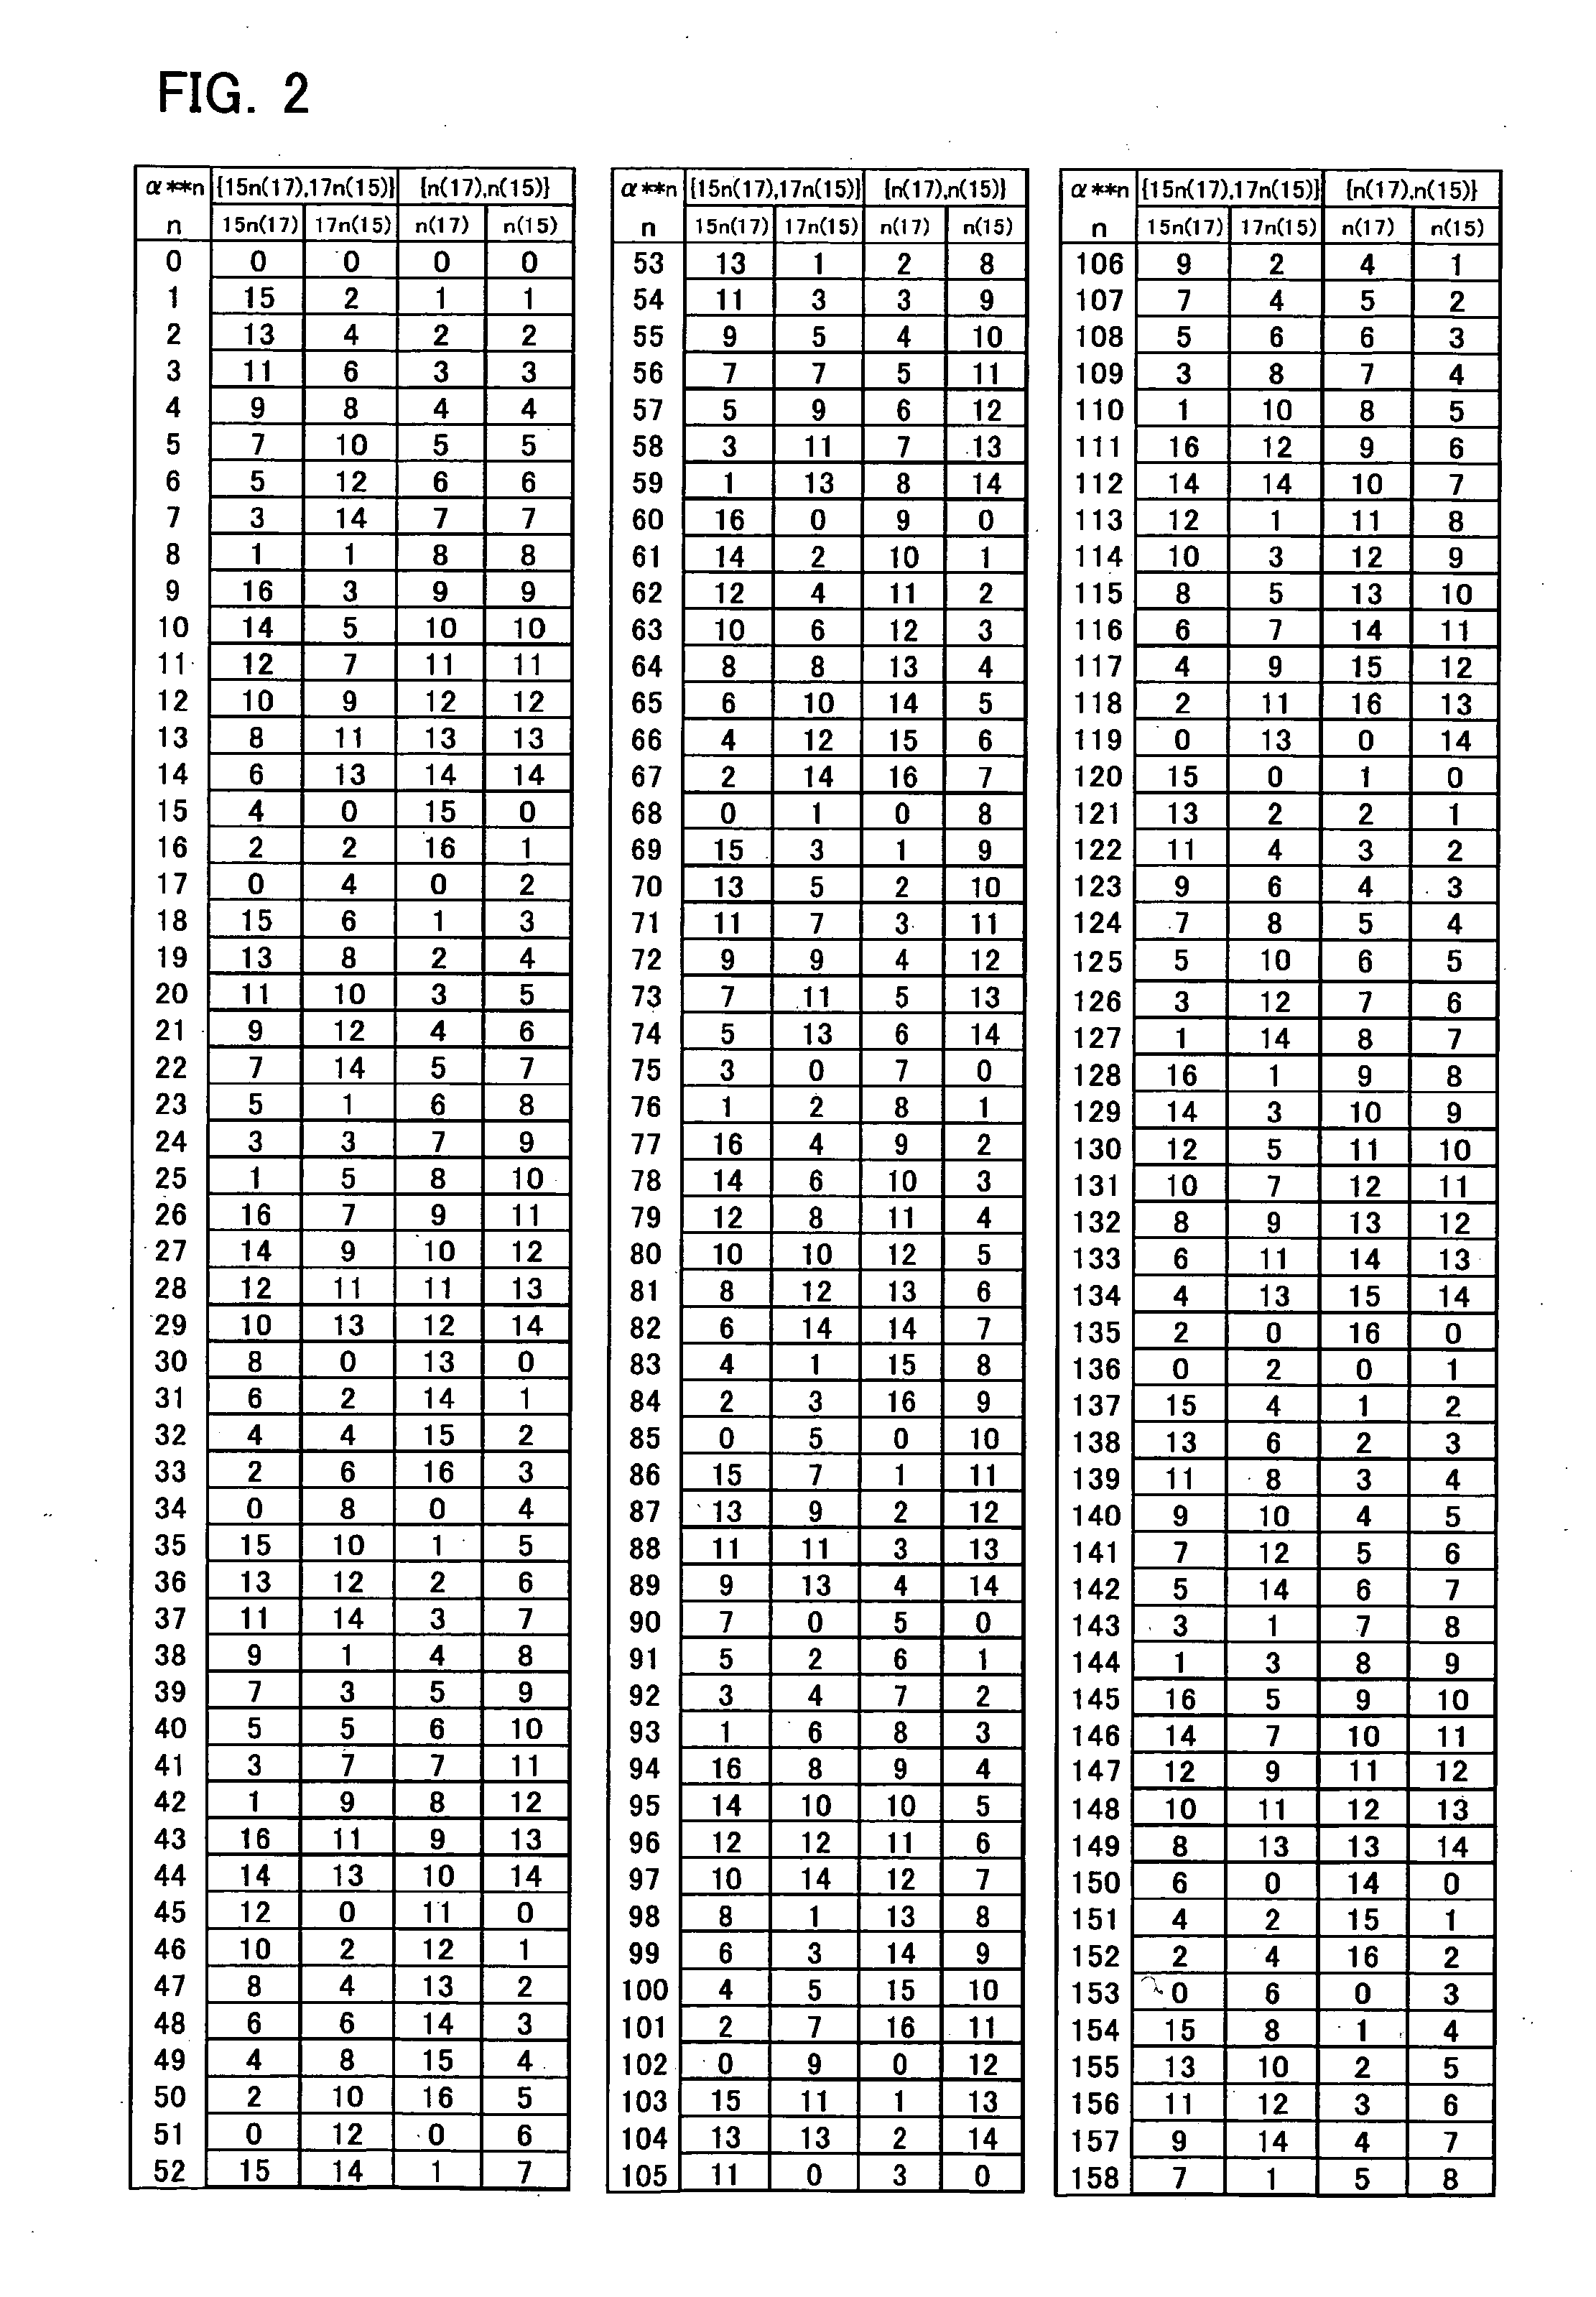 Semiconductor memory with reed-solomon decoder